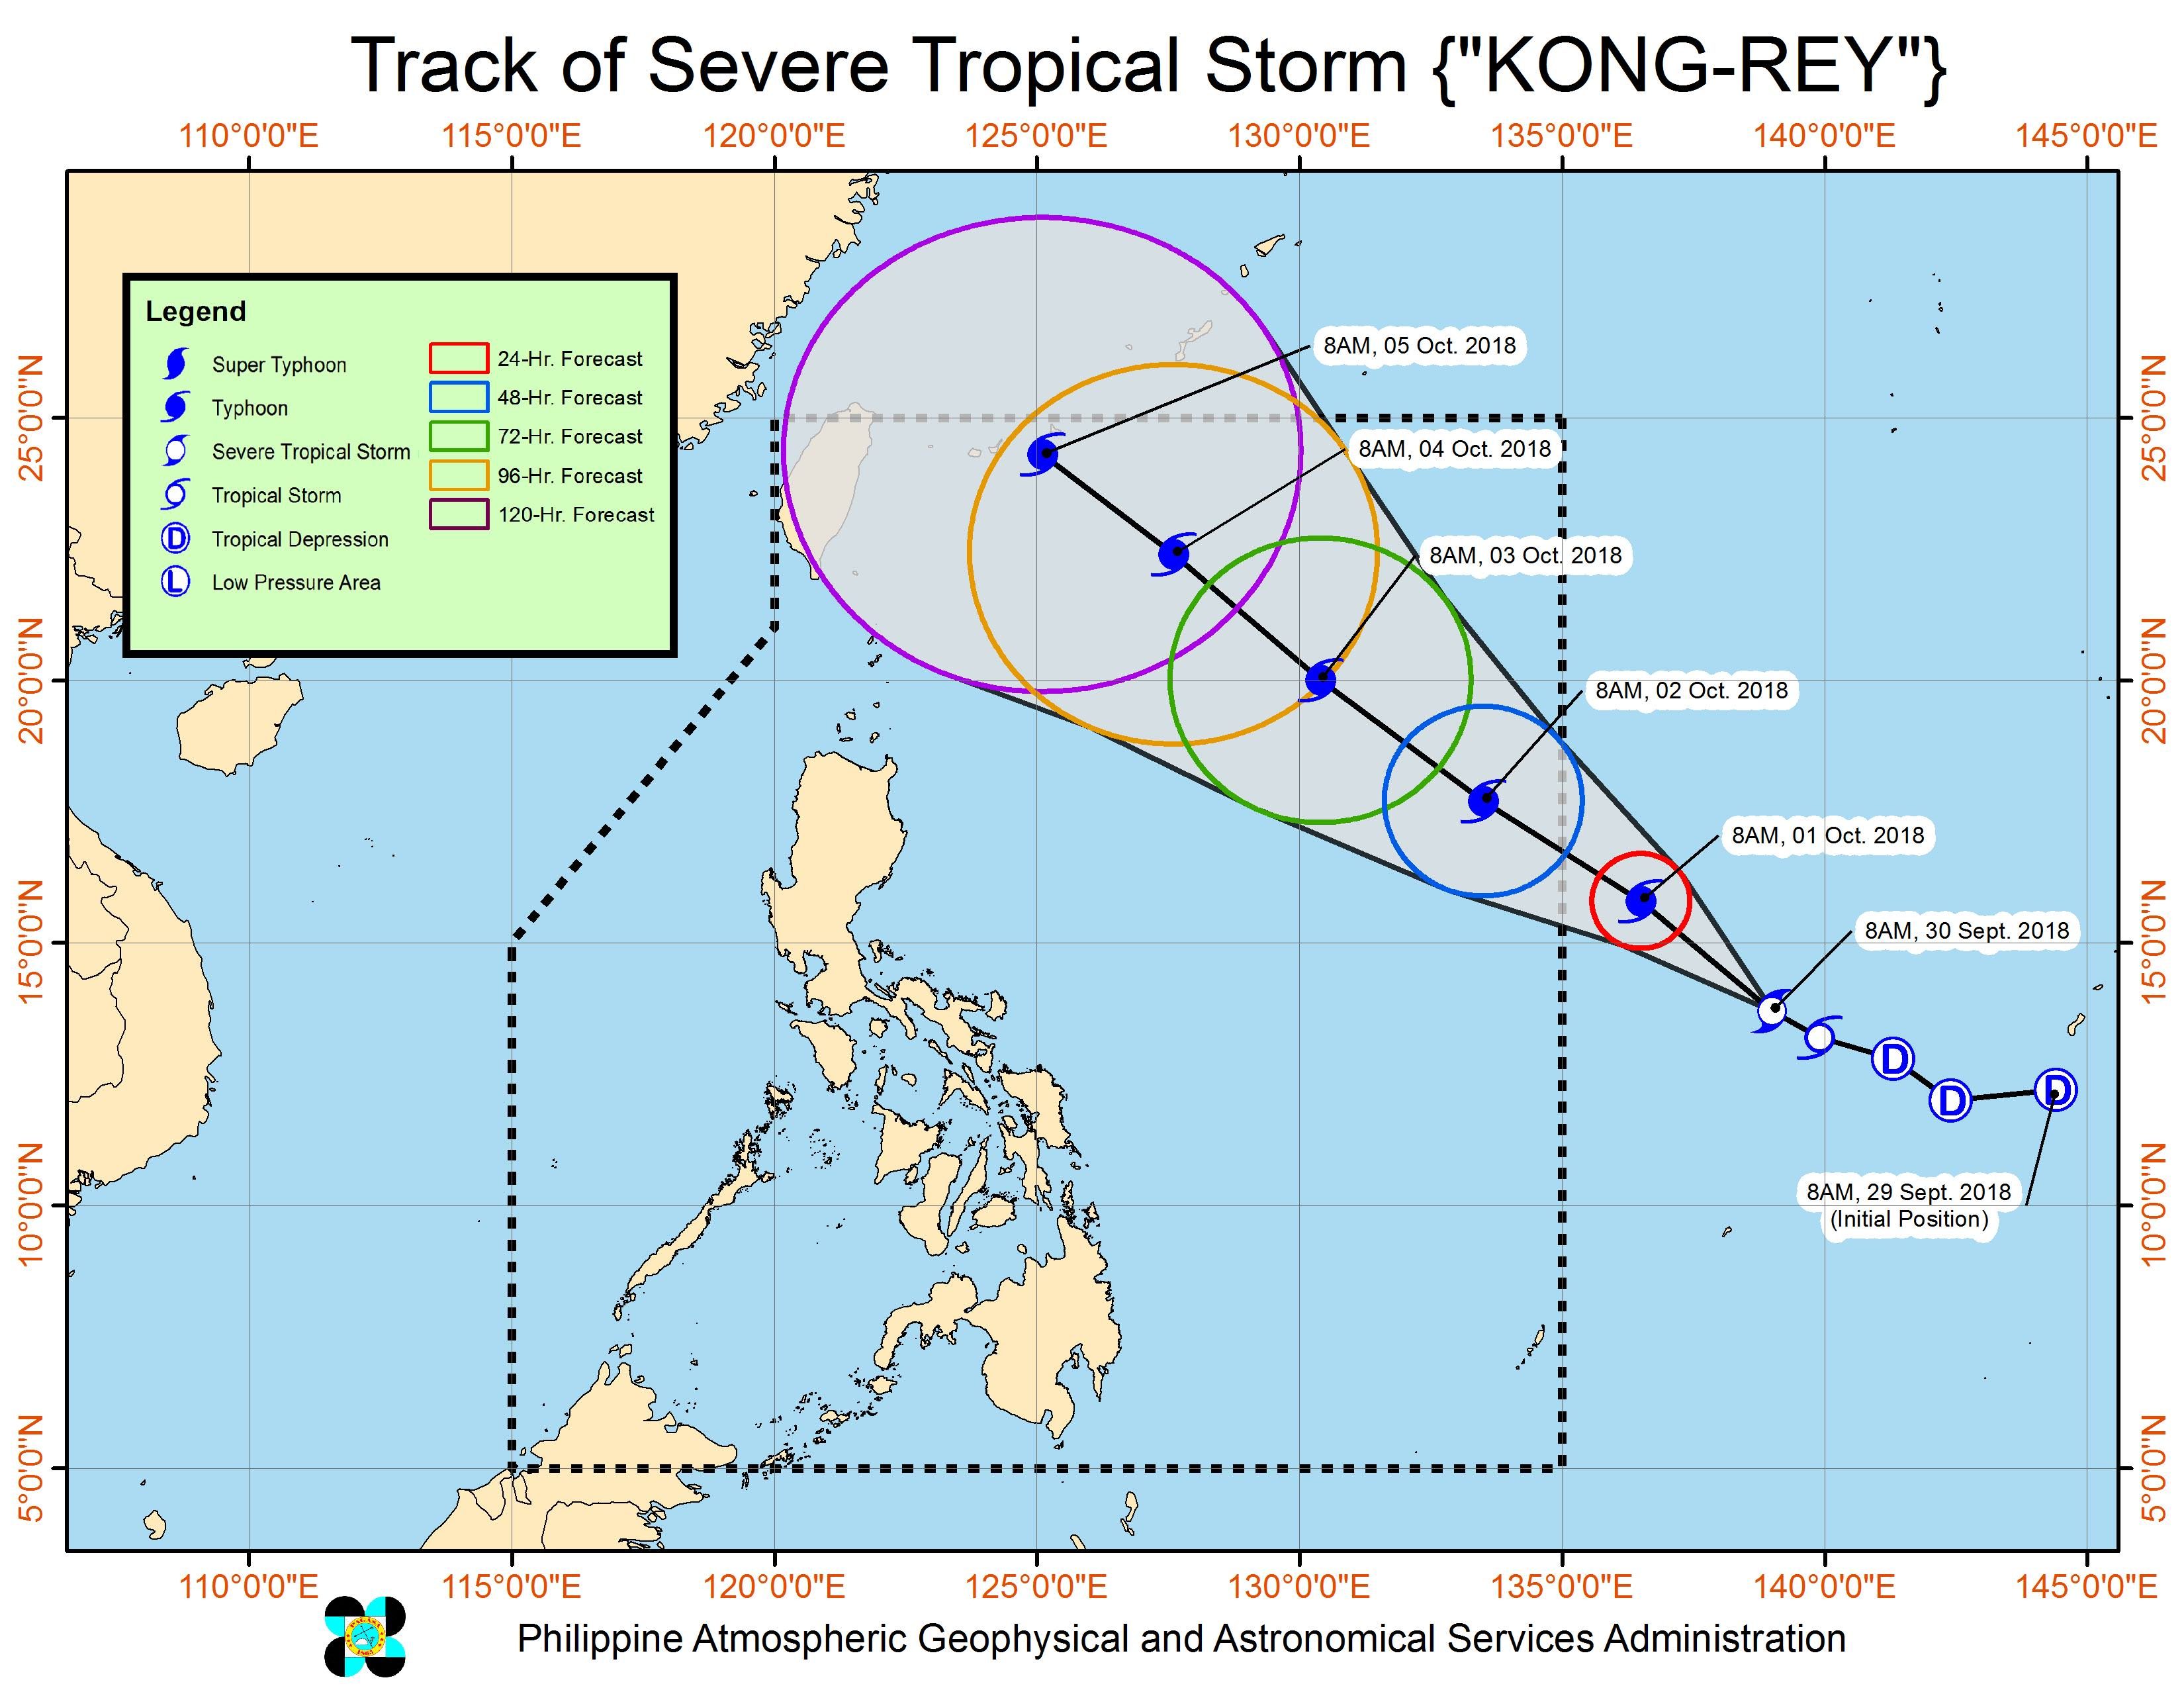 Forecast track of Severe Tropical Storm Kong-rey as of September 30, 2018, 11 am. Image from PAGASA 